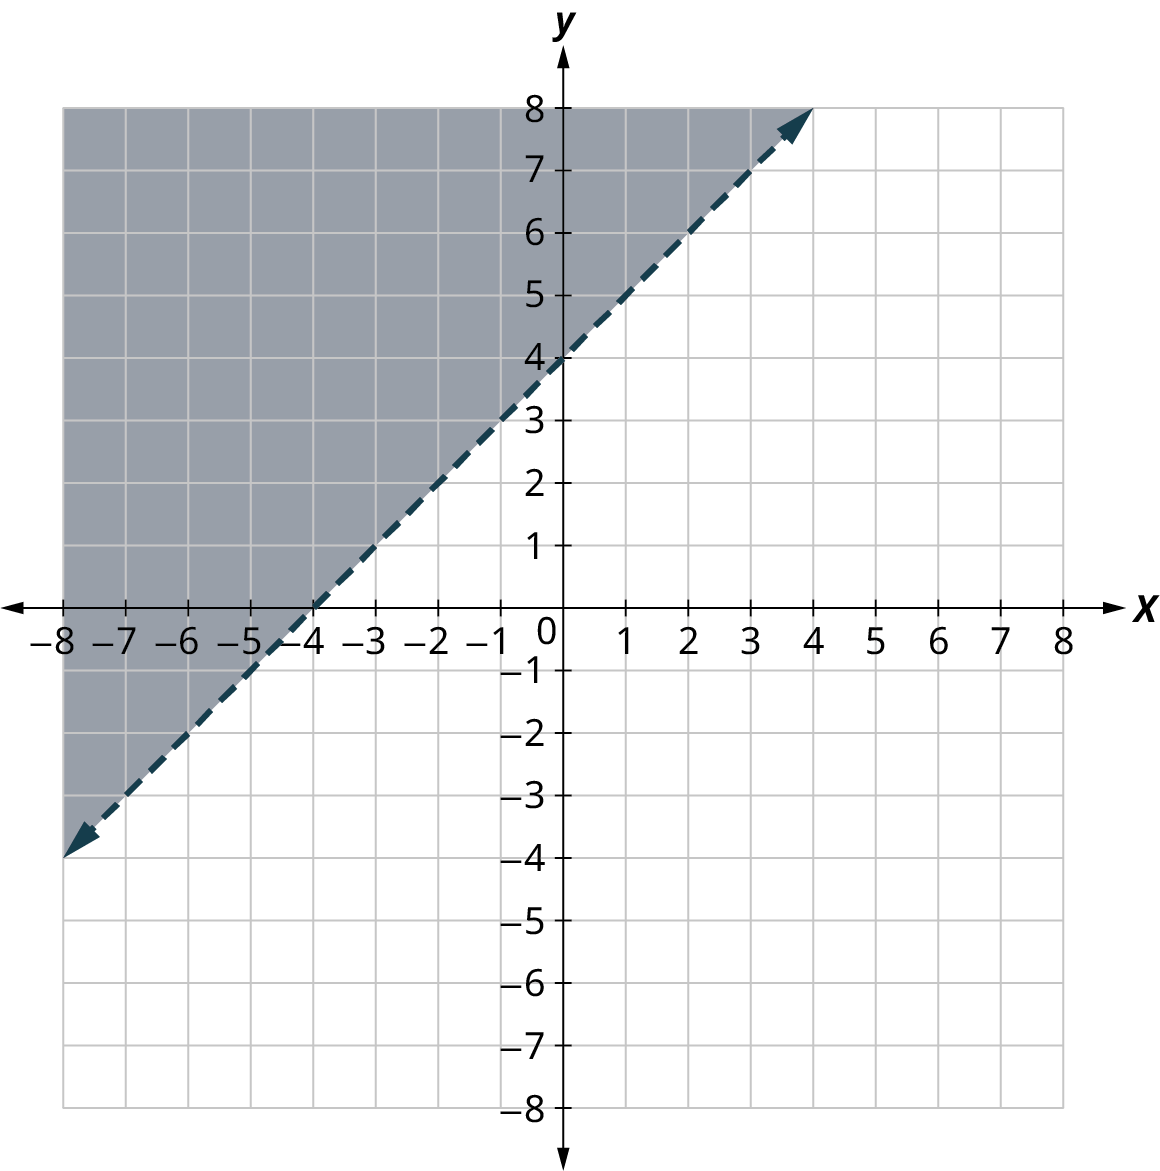 A dashed line is plotted on an x y coordinate plane. The x and y axes range from negative 8 to 8, in increments of 1. The line passes through the following points, (negative 8, negative 4), (negative 4, 0), (0, 4), and (4, 8). The region above the line is shaded.